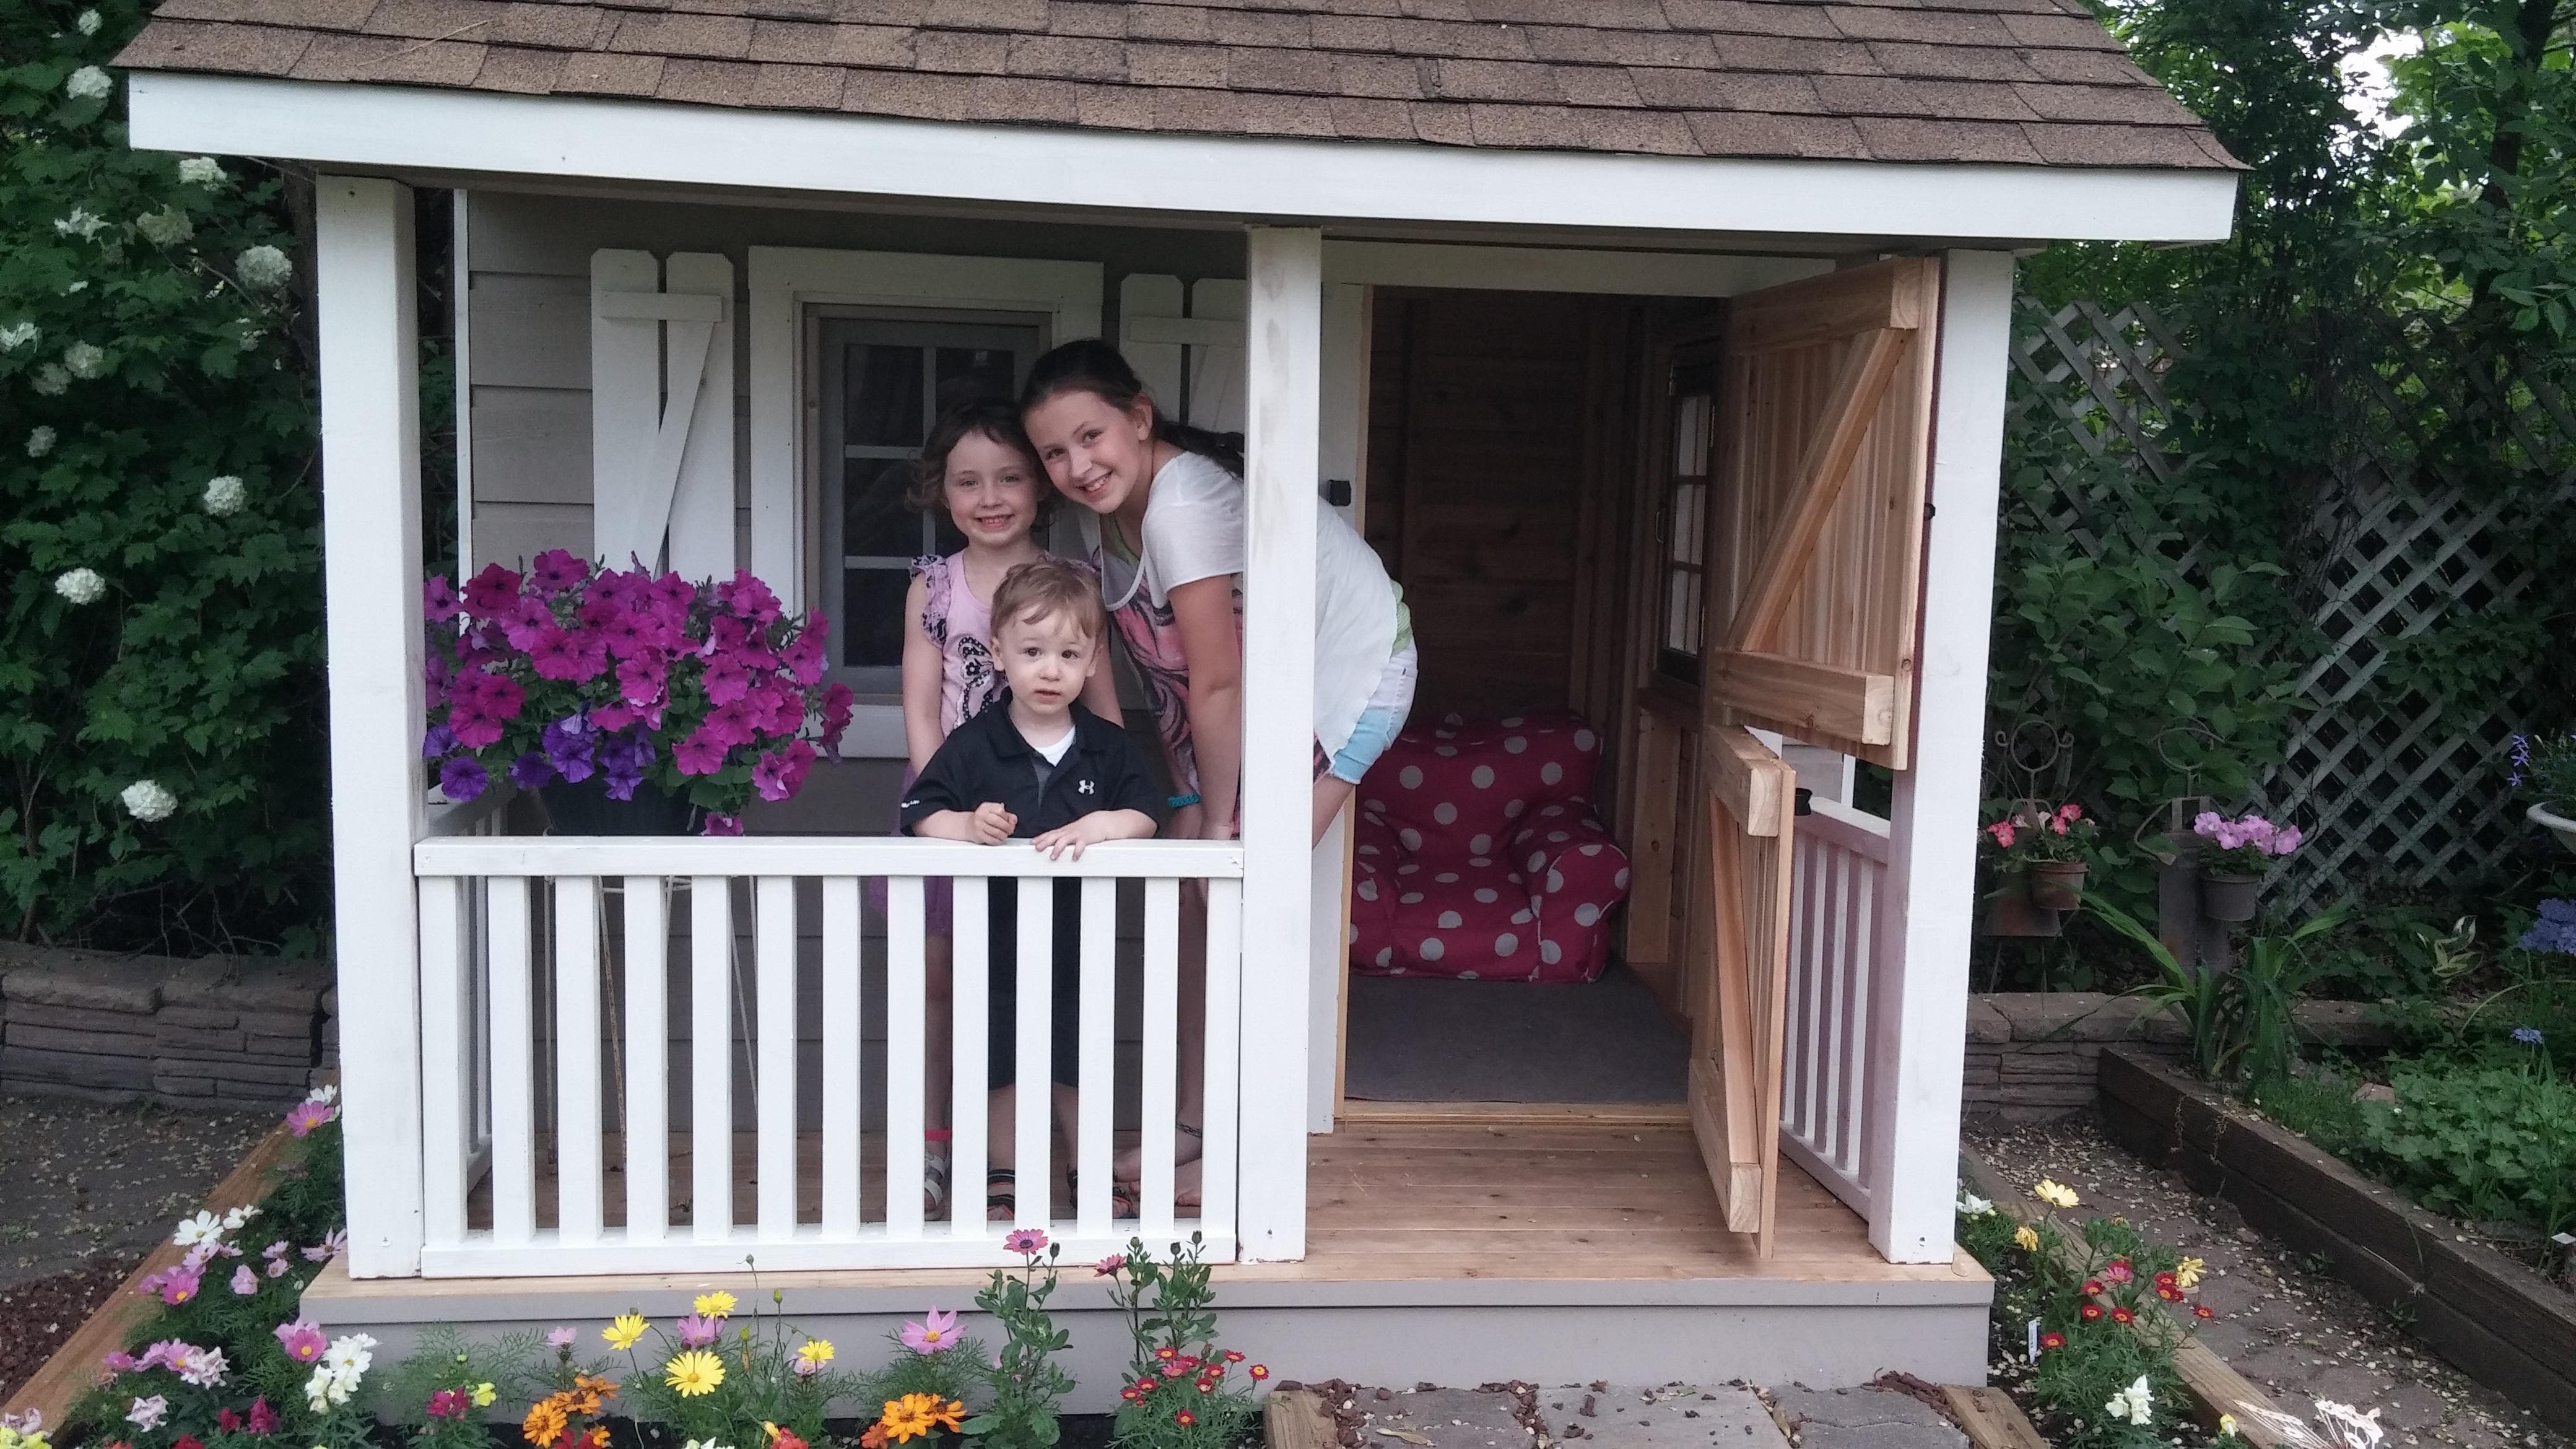 Peach picker porch 7x7 playhouse with dutch door in Bloomington Indiana. ID number 177035-1.